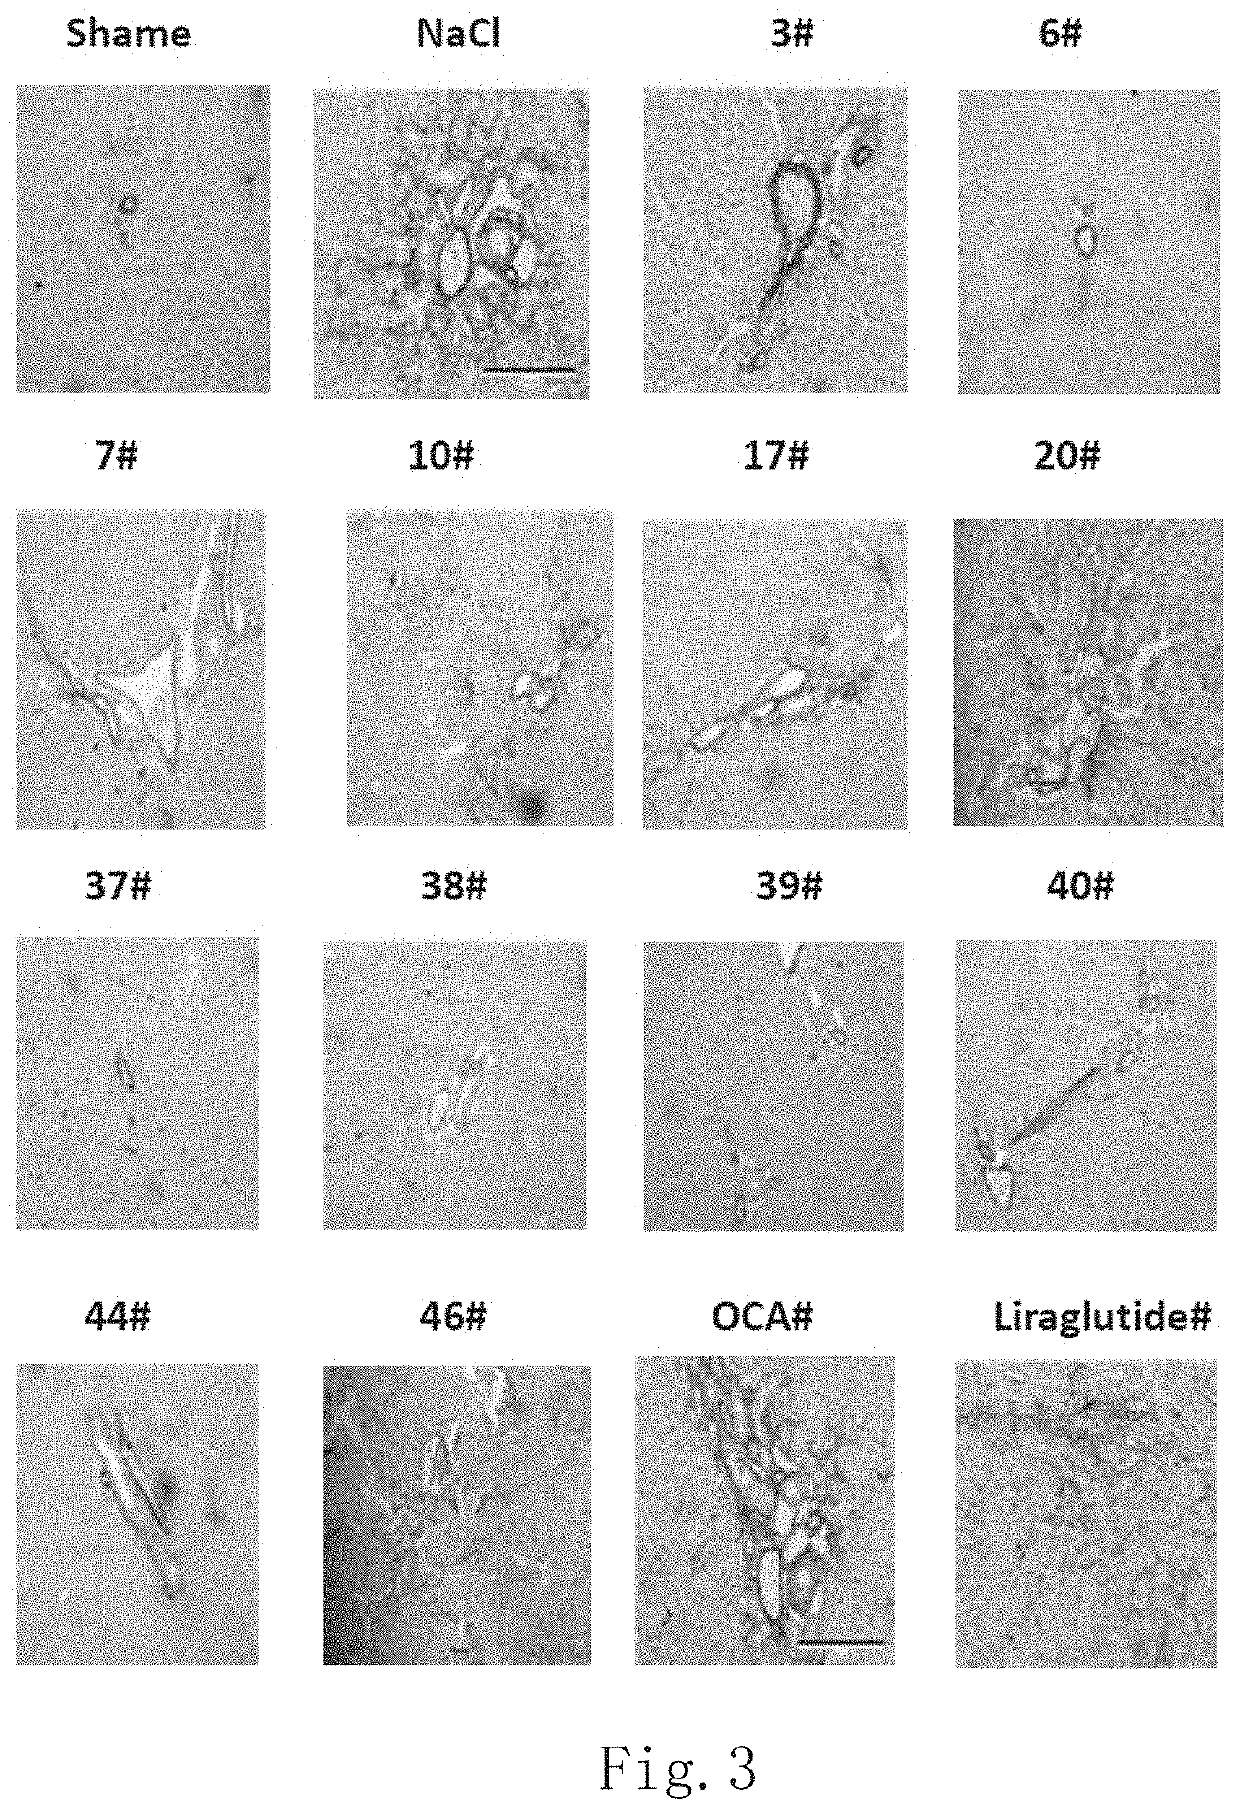 Treatment of biliary cirrhosis based on oxyntomodulin analogue glp-1r/gcgr dual-target agonist peptide